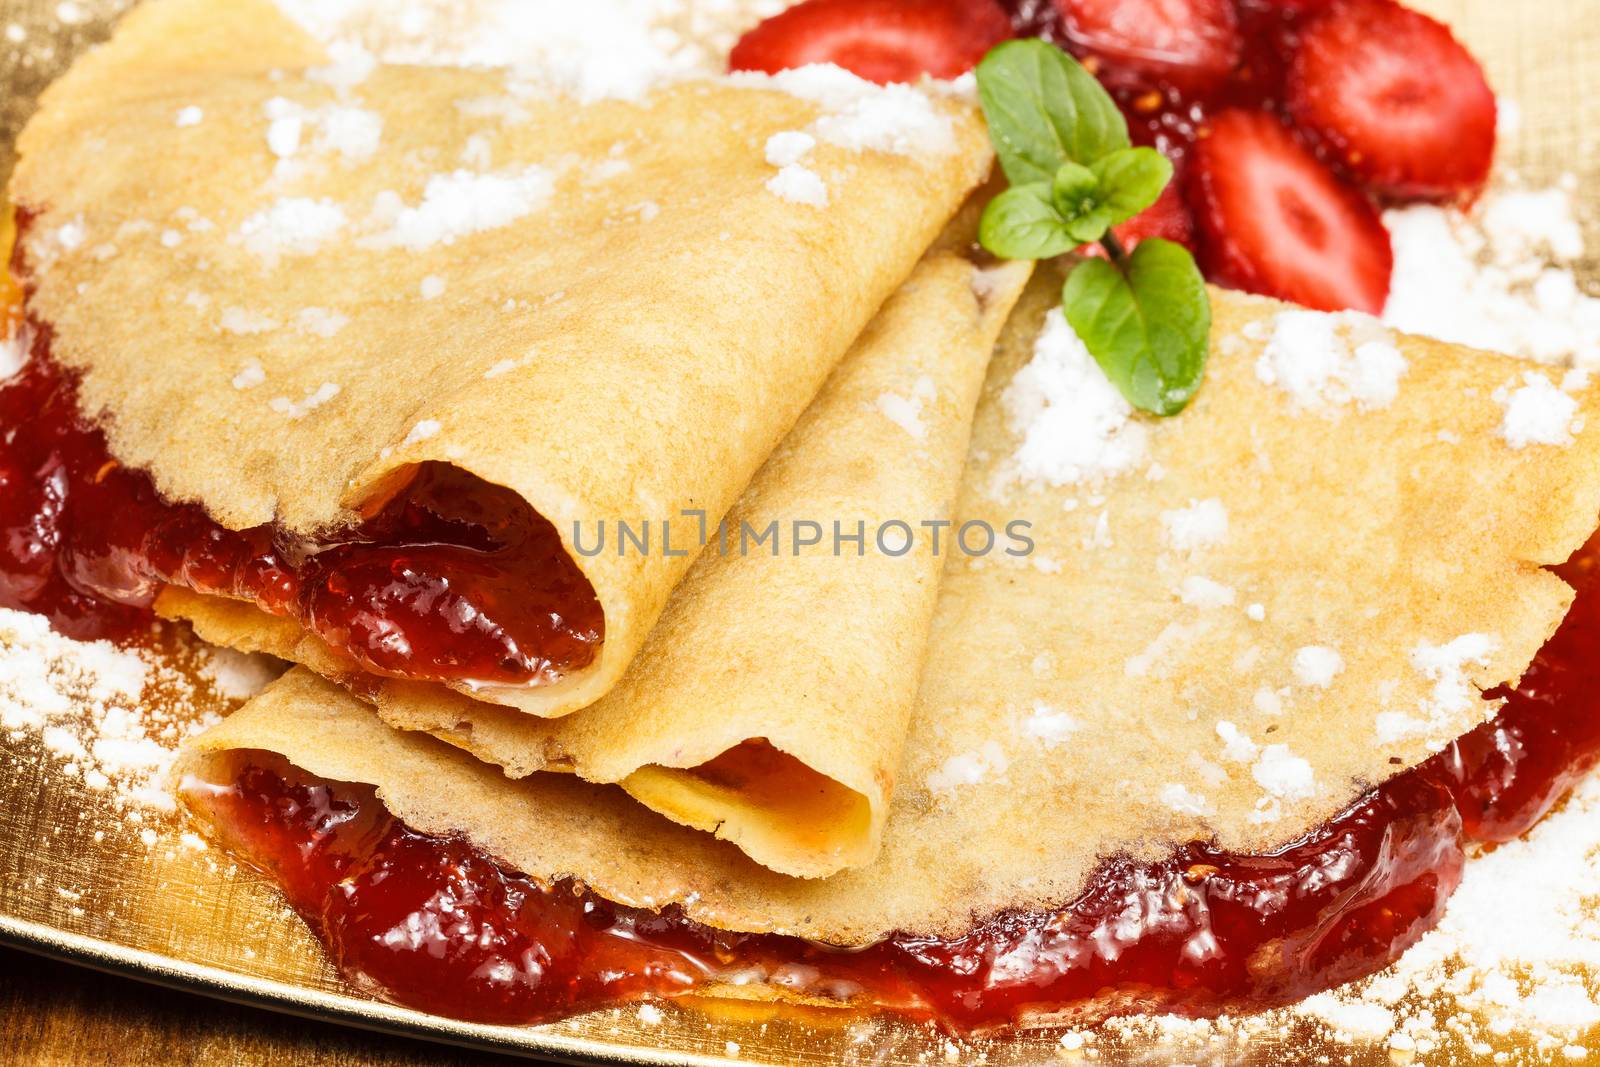 Crepes by Slast20